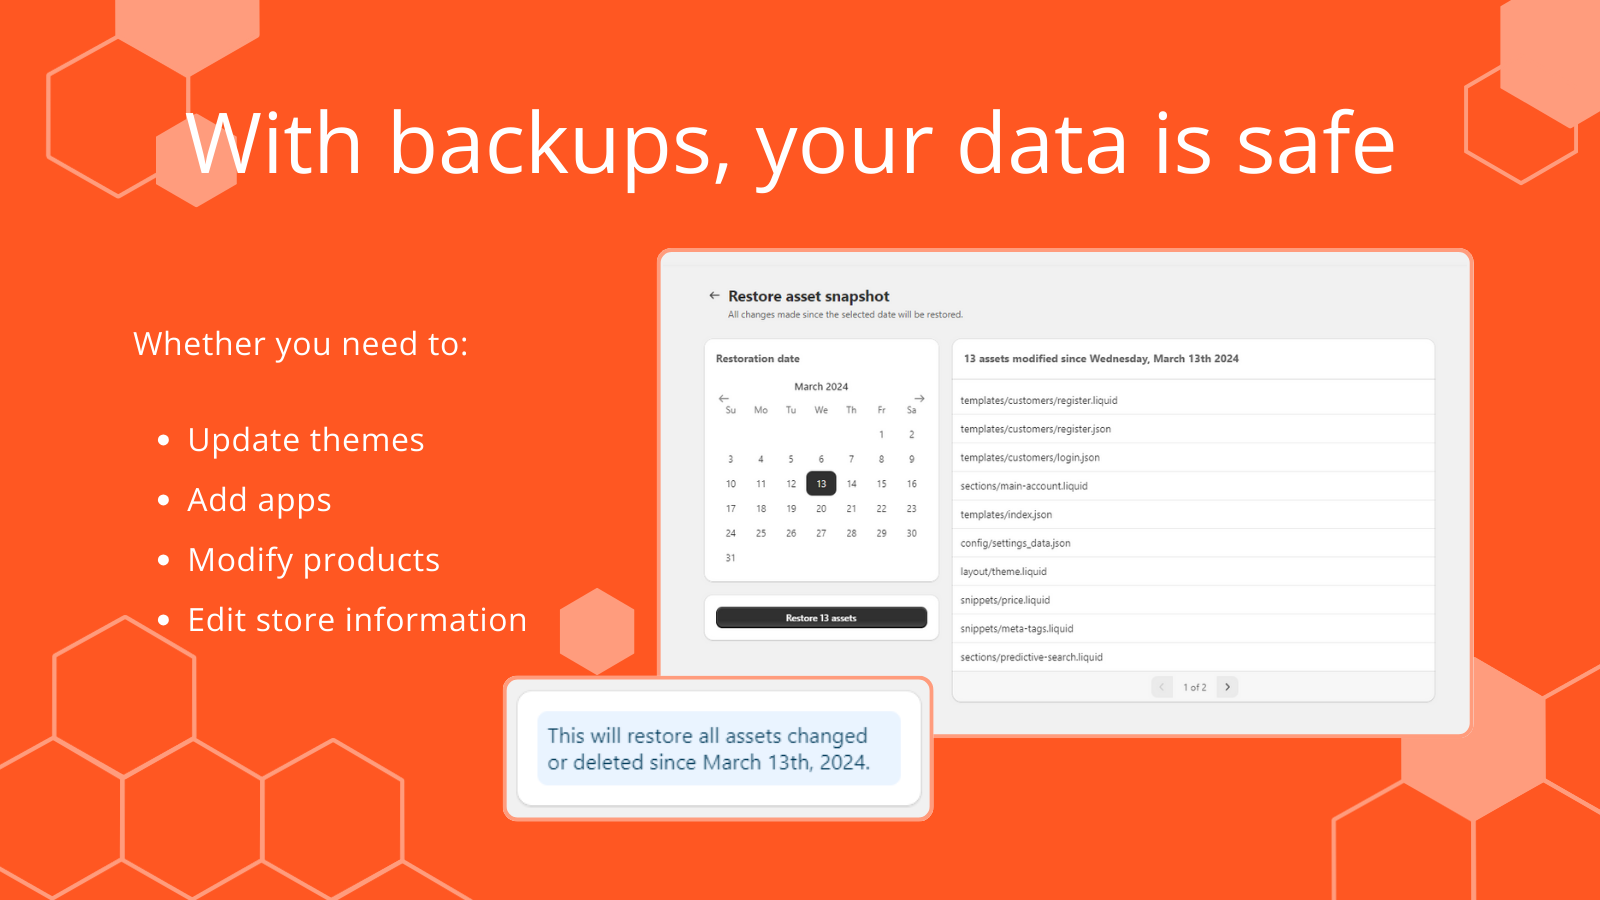 With backups, your data is safe